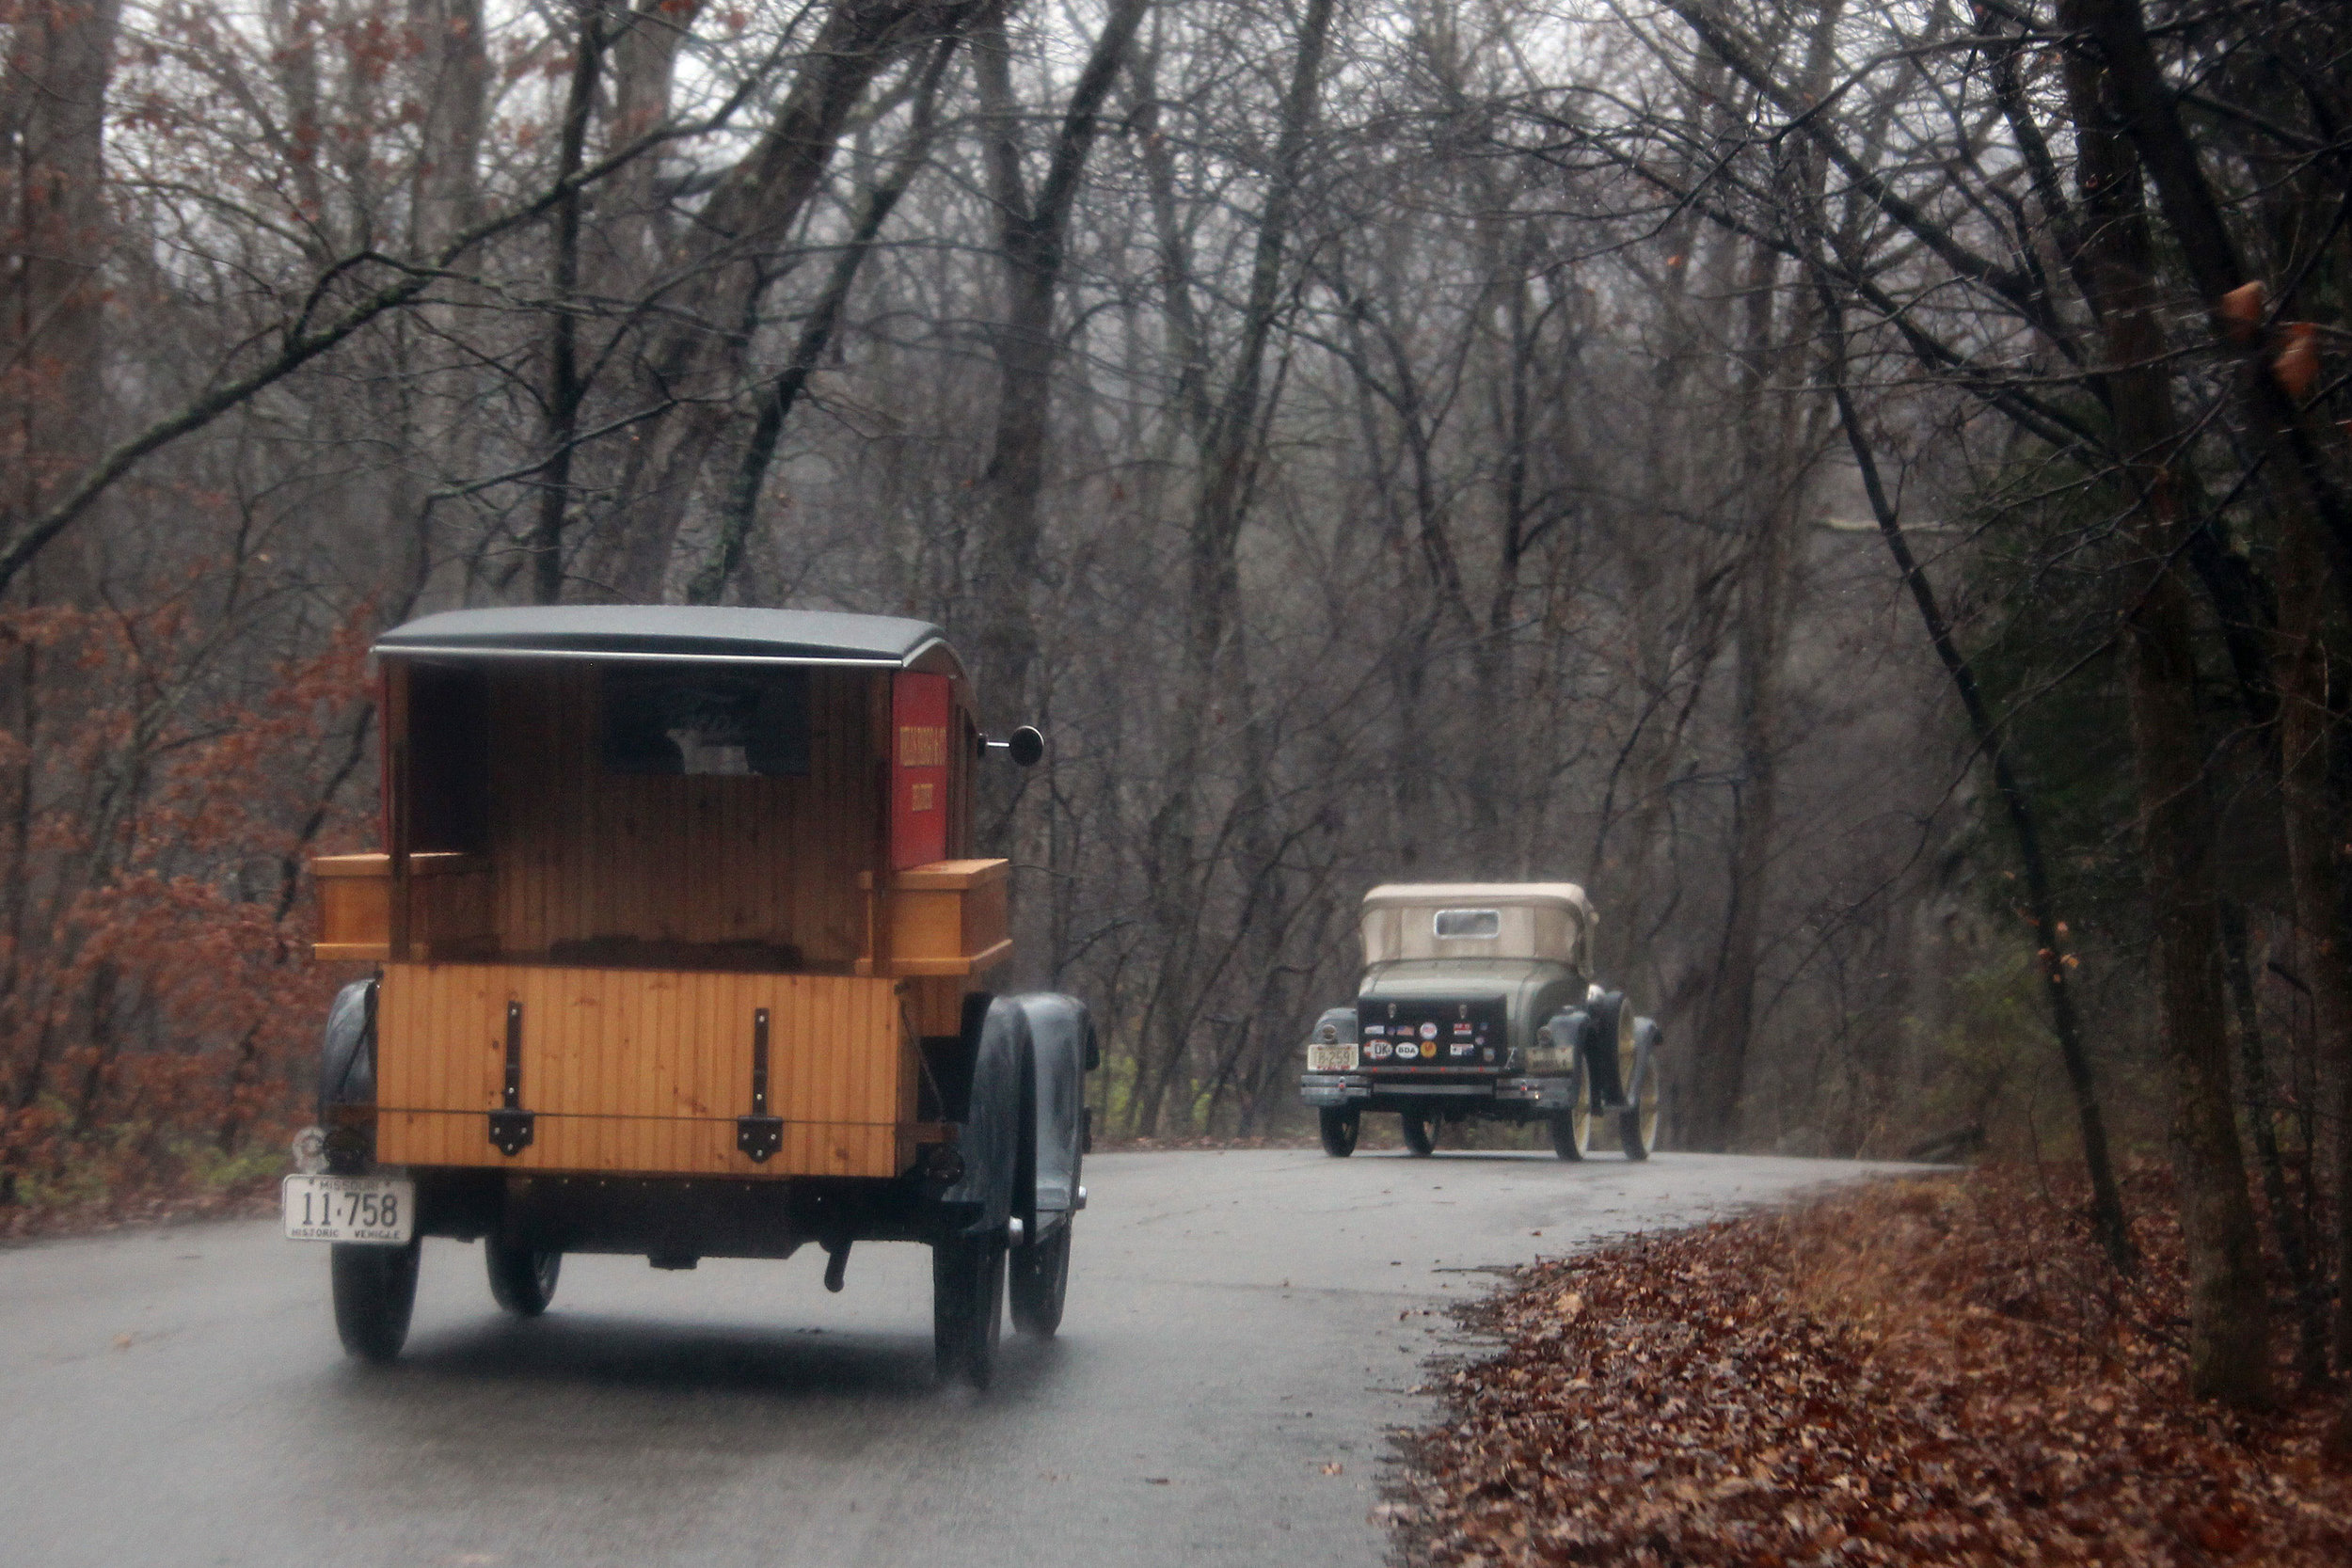   The Peistrups and the Burks Model A's en route to the event regardless of the rain  